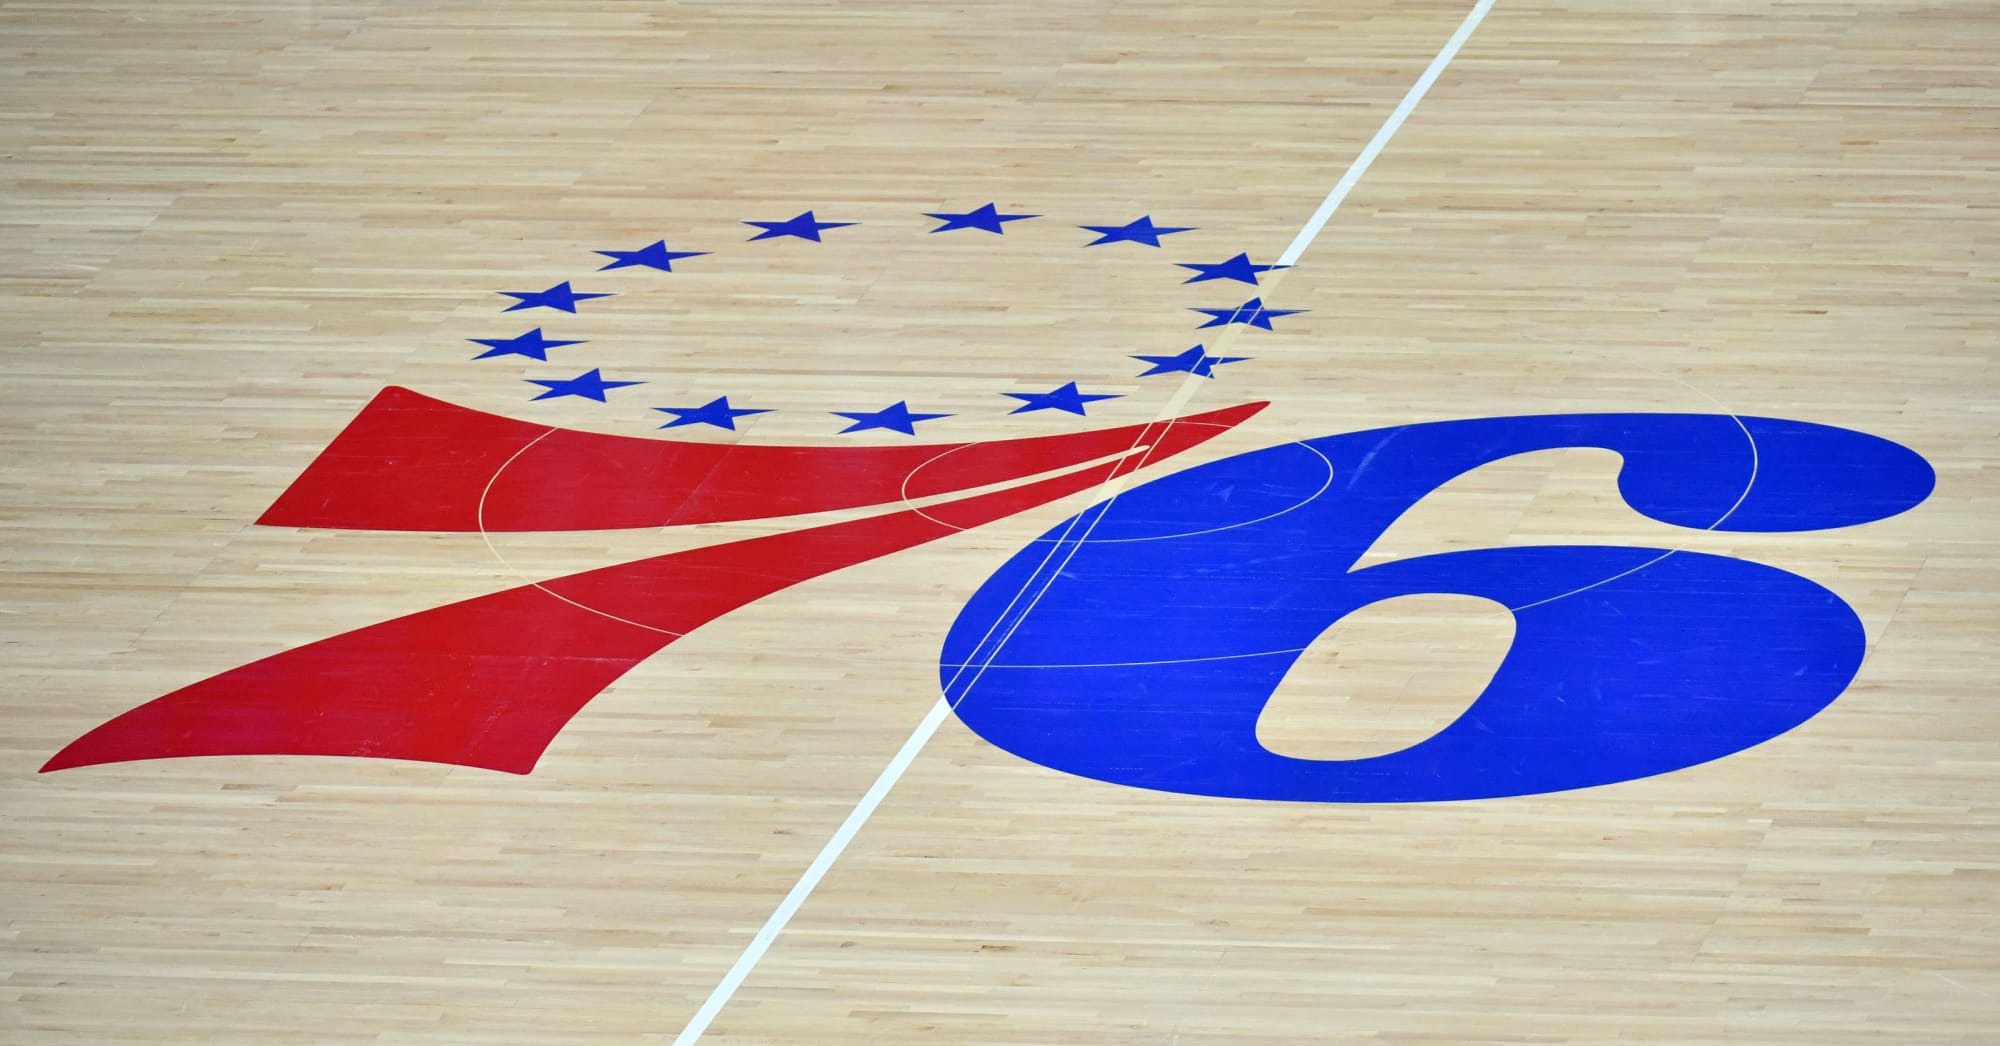 What is the snake on Philadelphia 76ers court explained